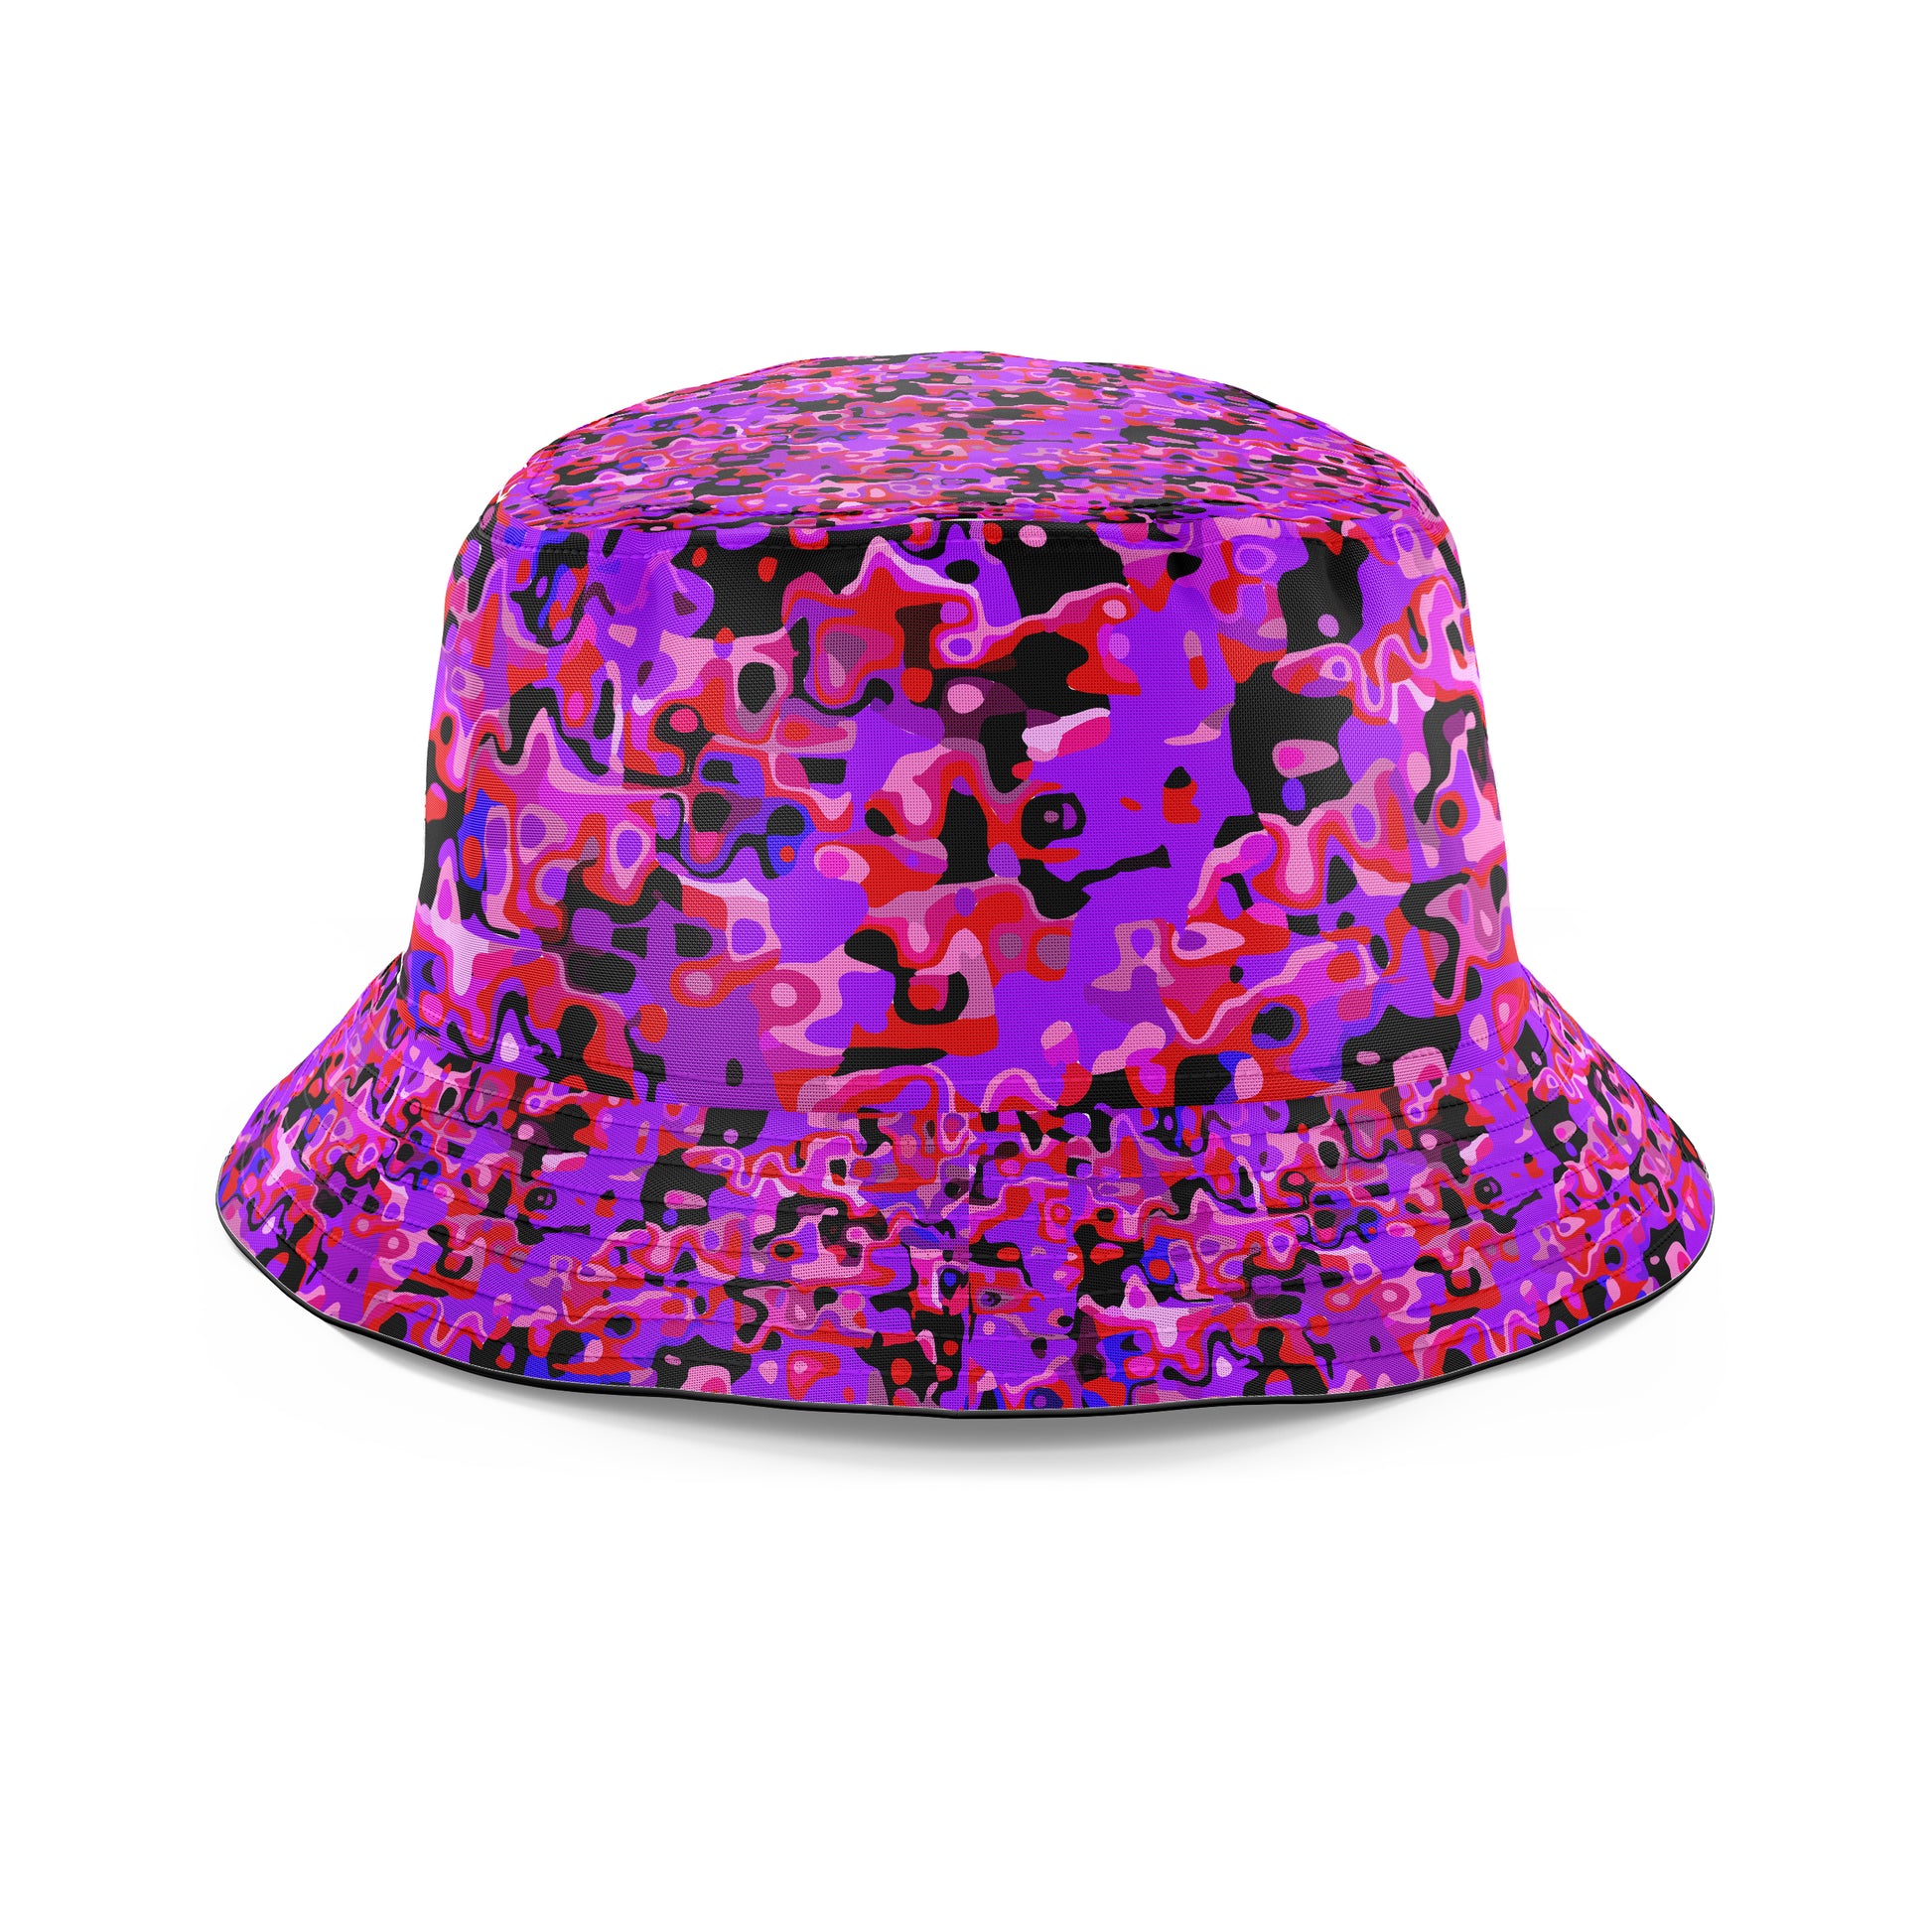 Purple Red and Black Rave Camo Melt T-Shirt and Shorts with Bucket Hat Combo, Big Tex Funkadelic, | iEDM